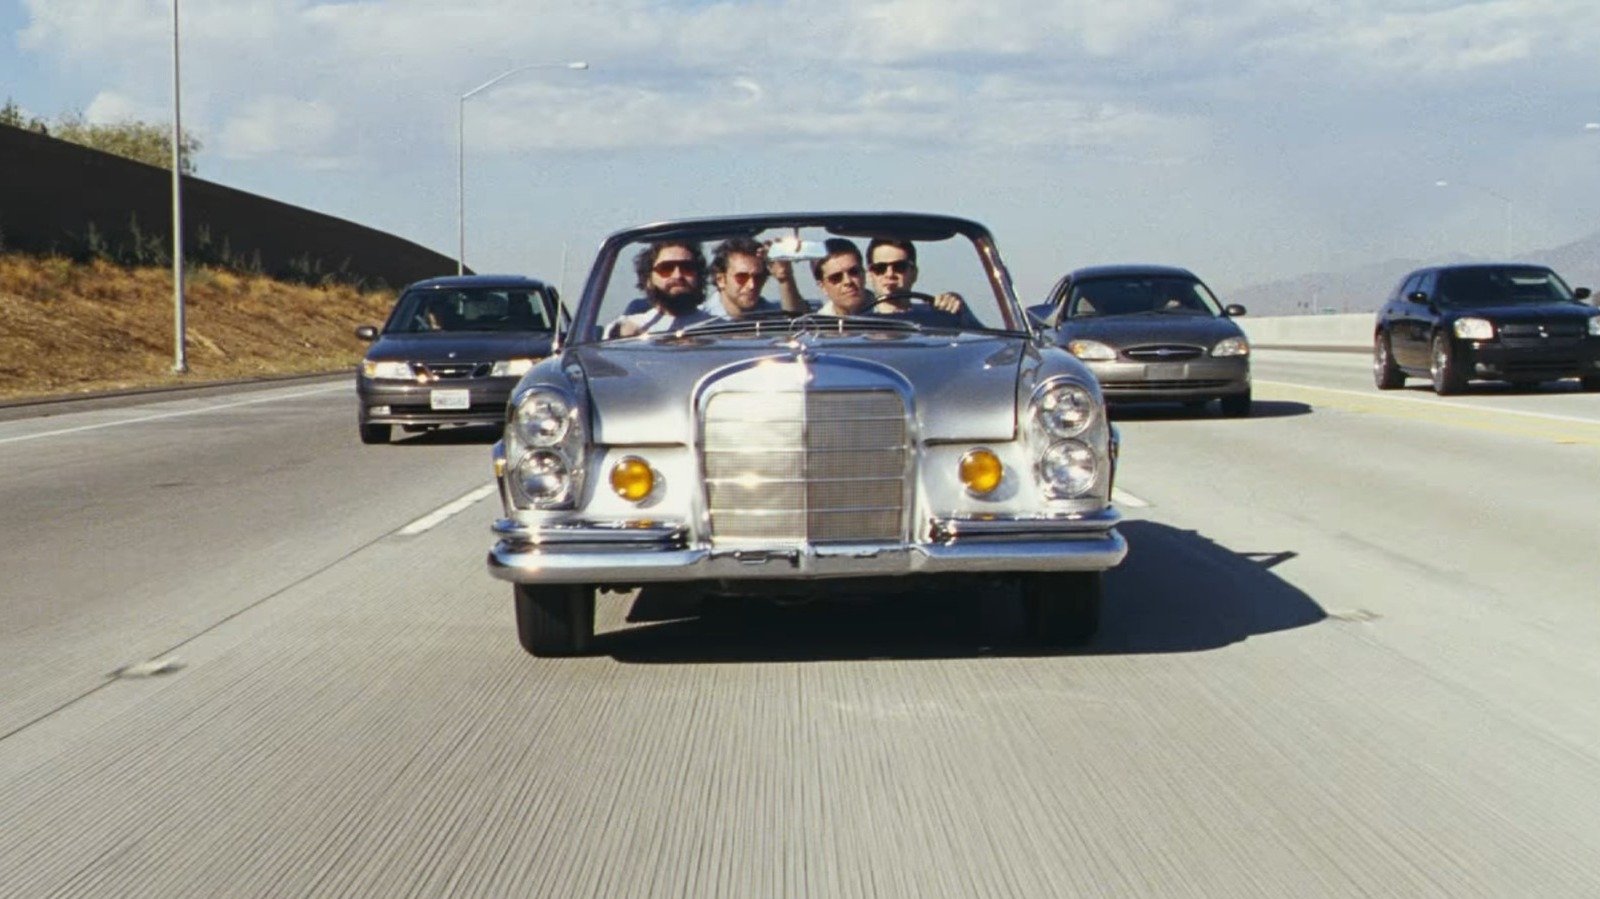 What Ever Happened To The Mercedes 220SE From The Hangover?